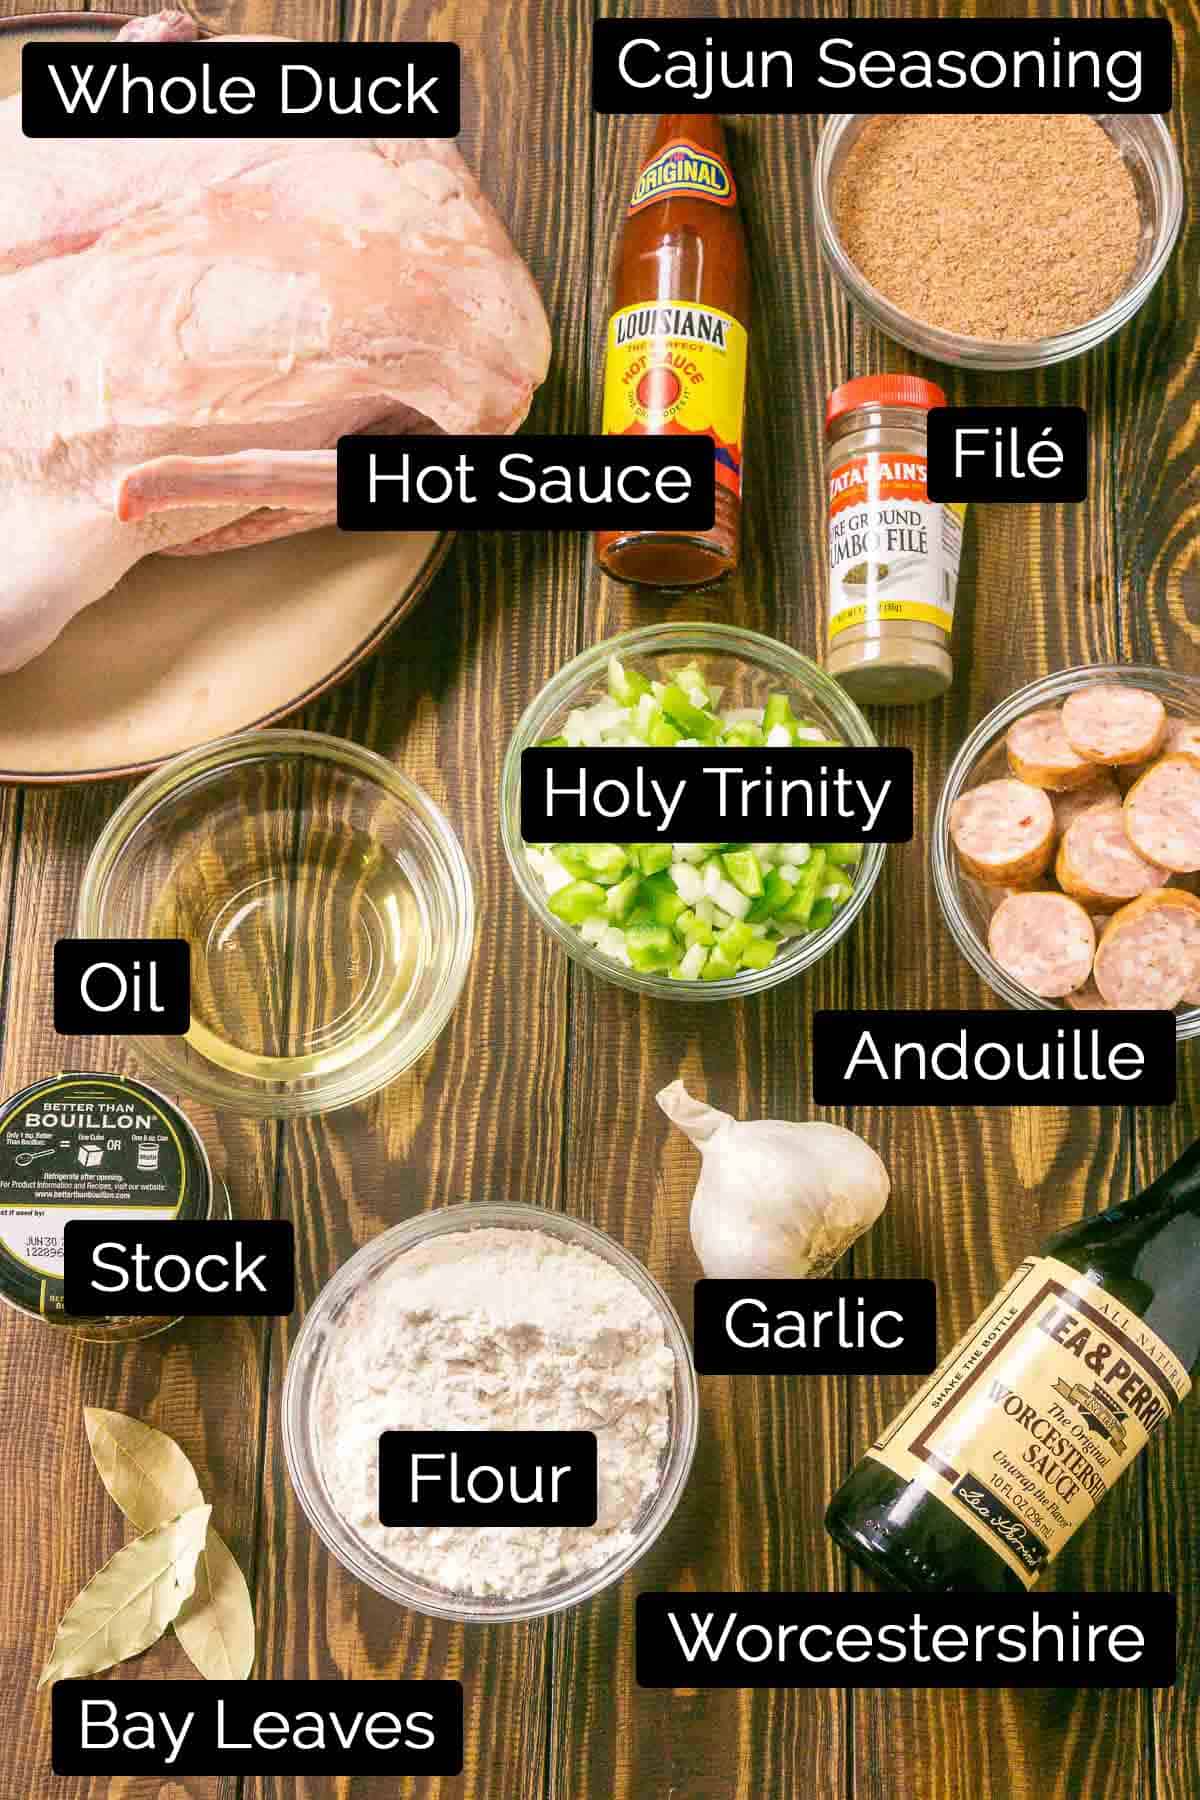 The duck gumbo ingredients with labels on a wooden board.